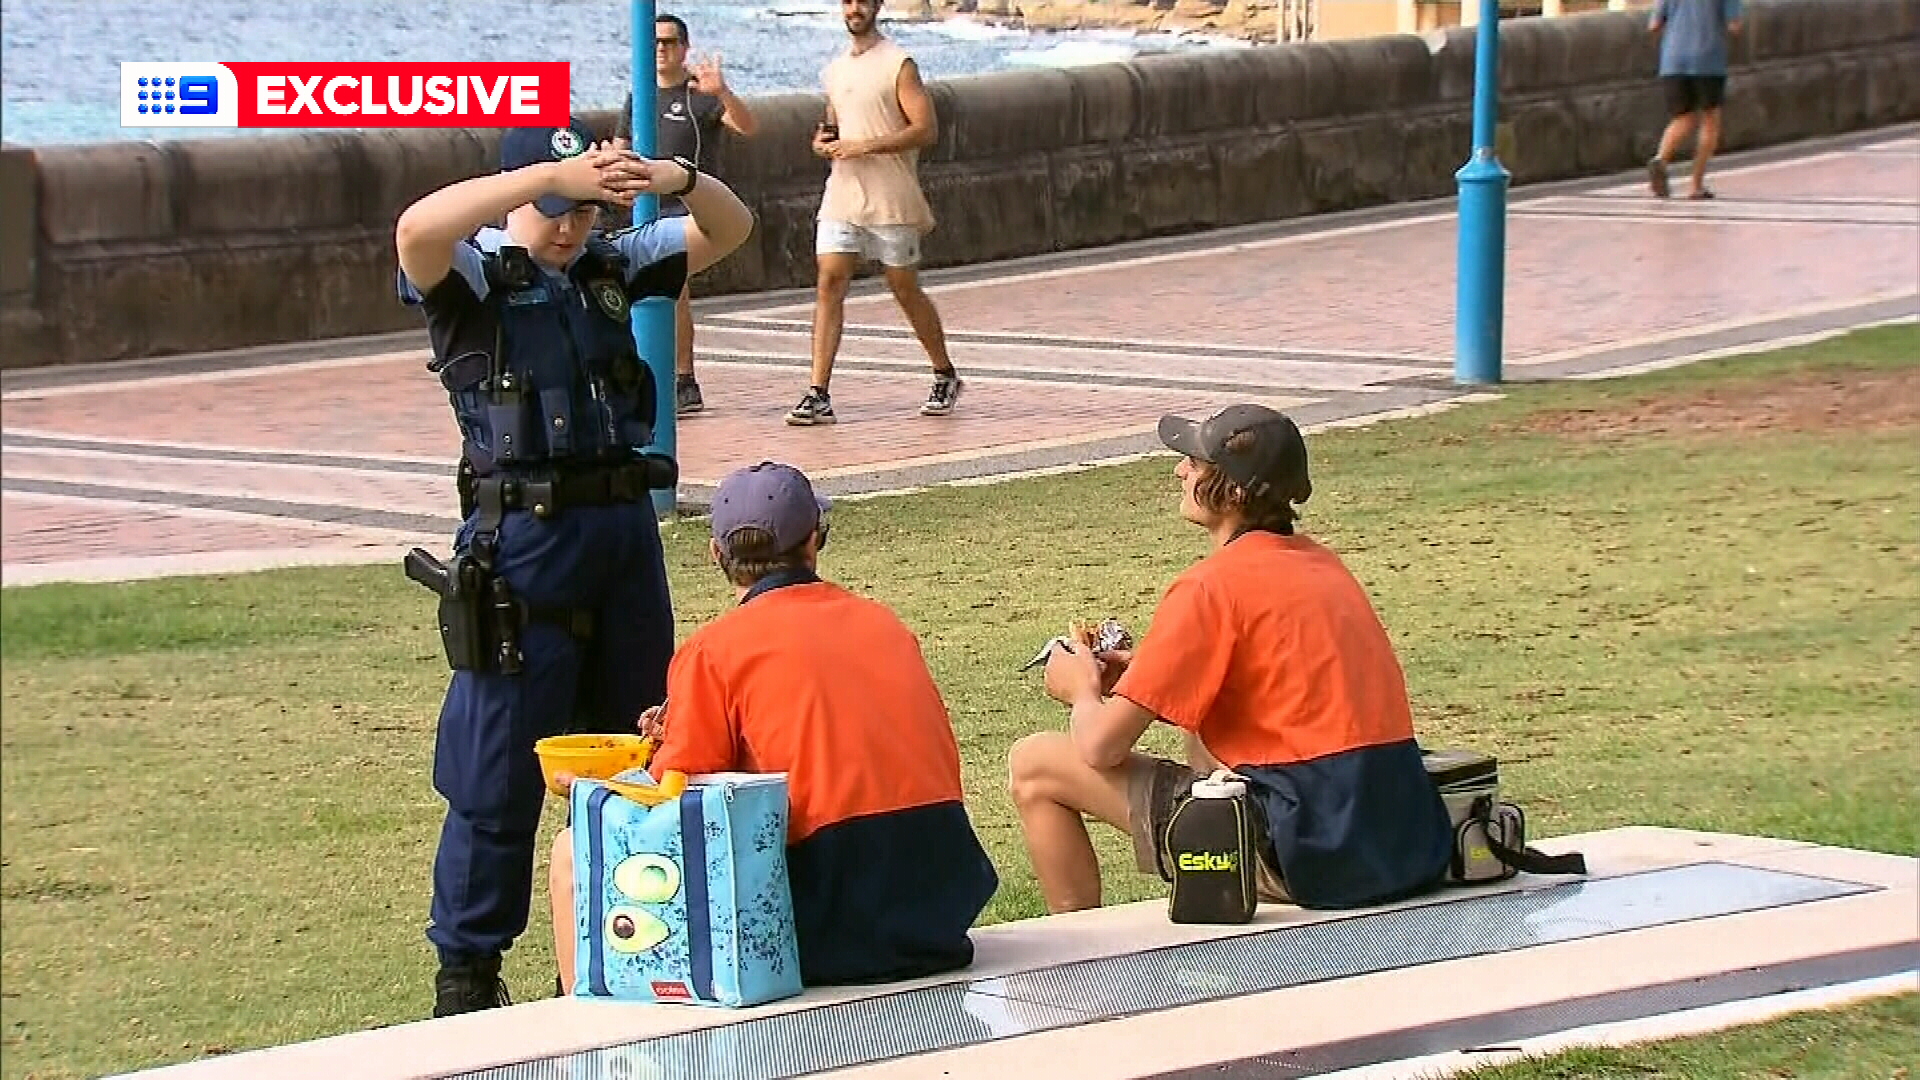 Tradies eating their lunch at Coogee are told to move on.